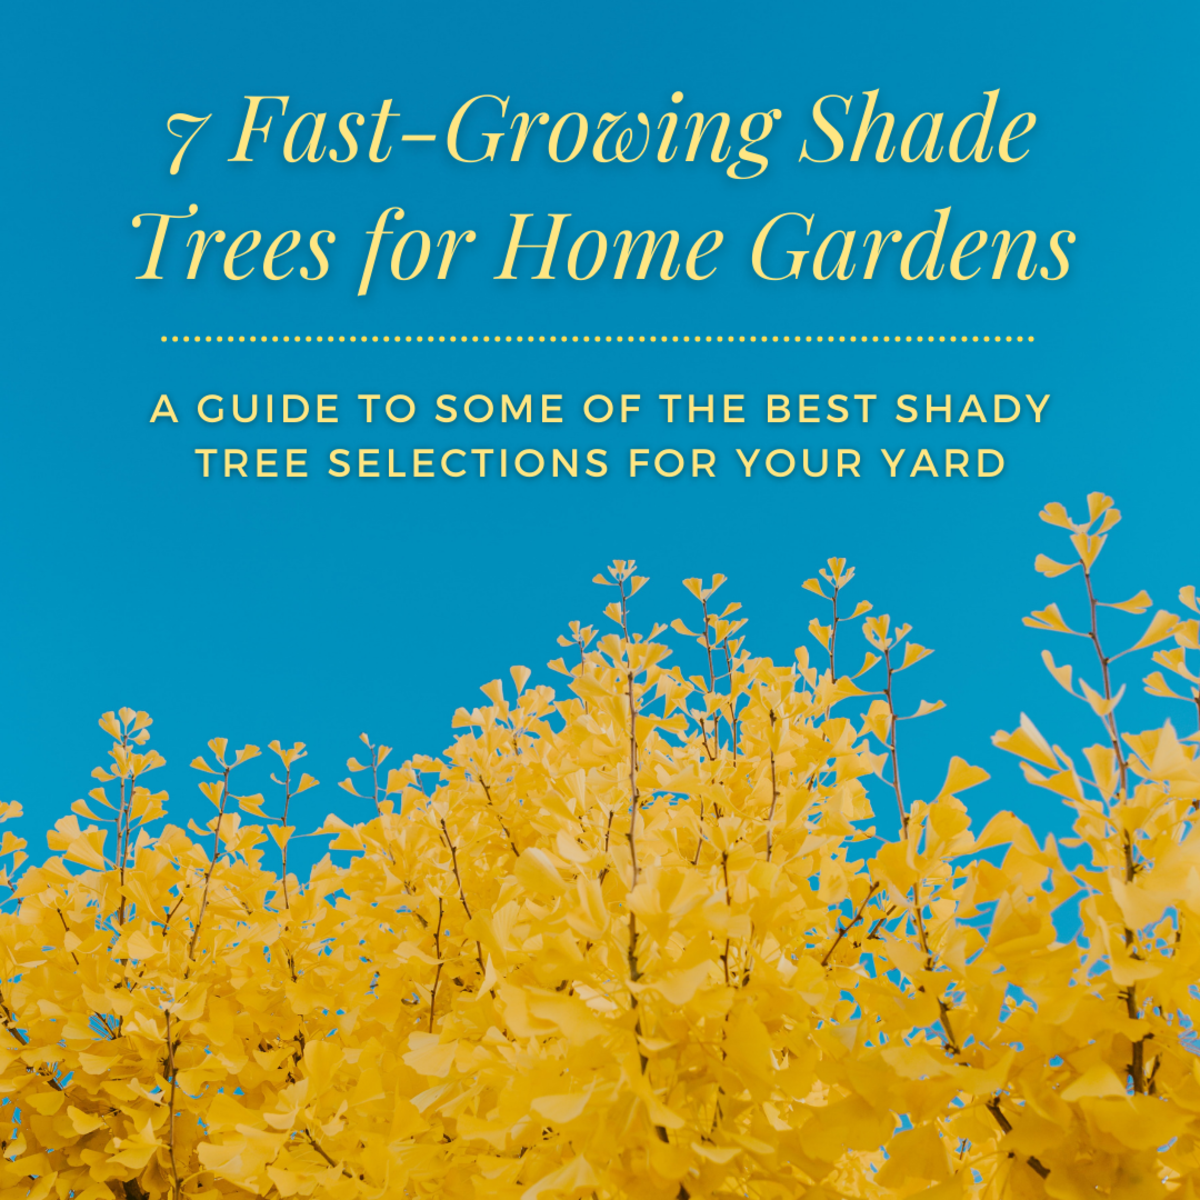 This article will share seven of the best fast-growing shade trees for home gardens.